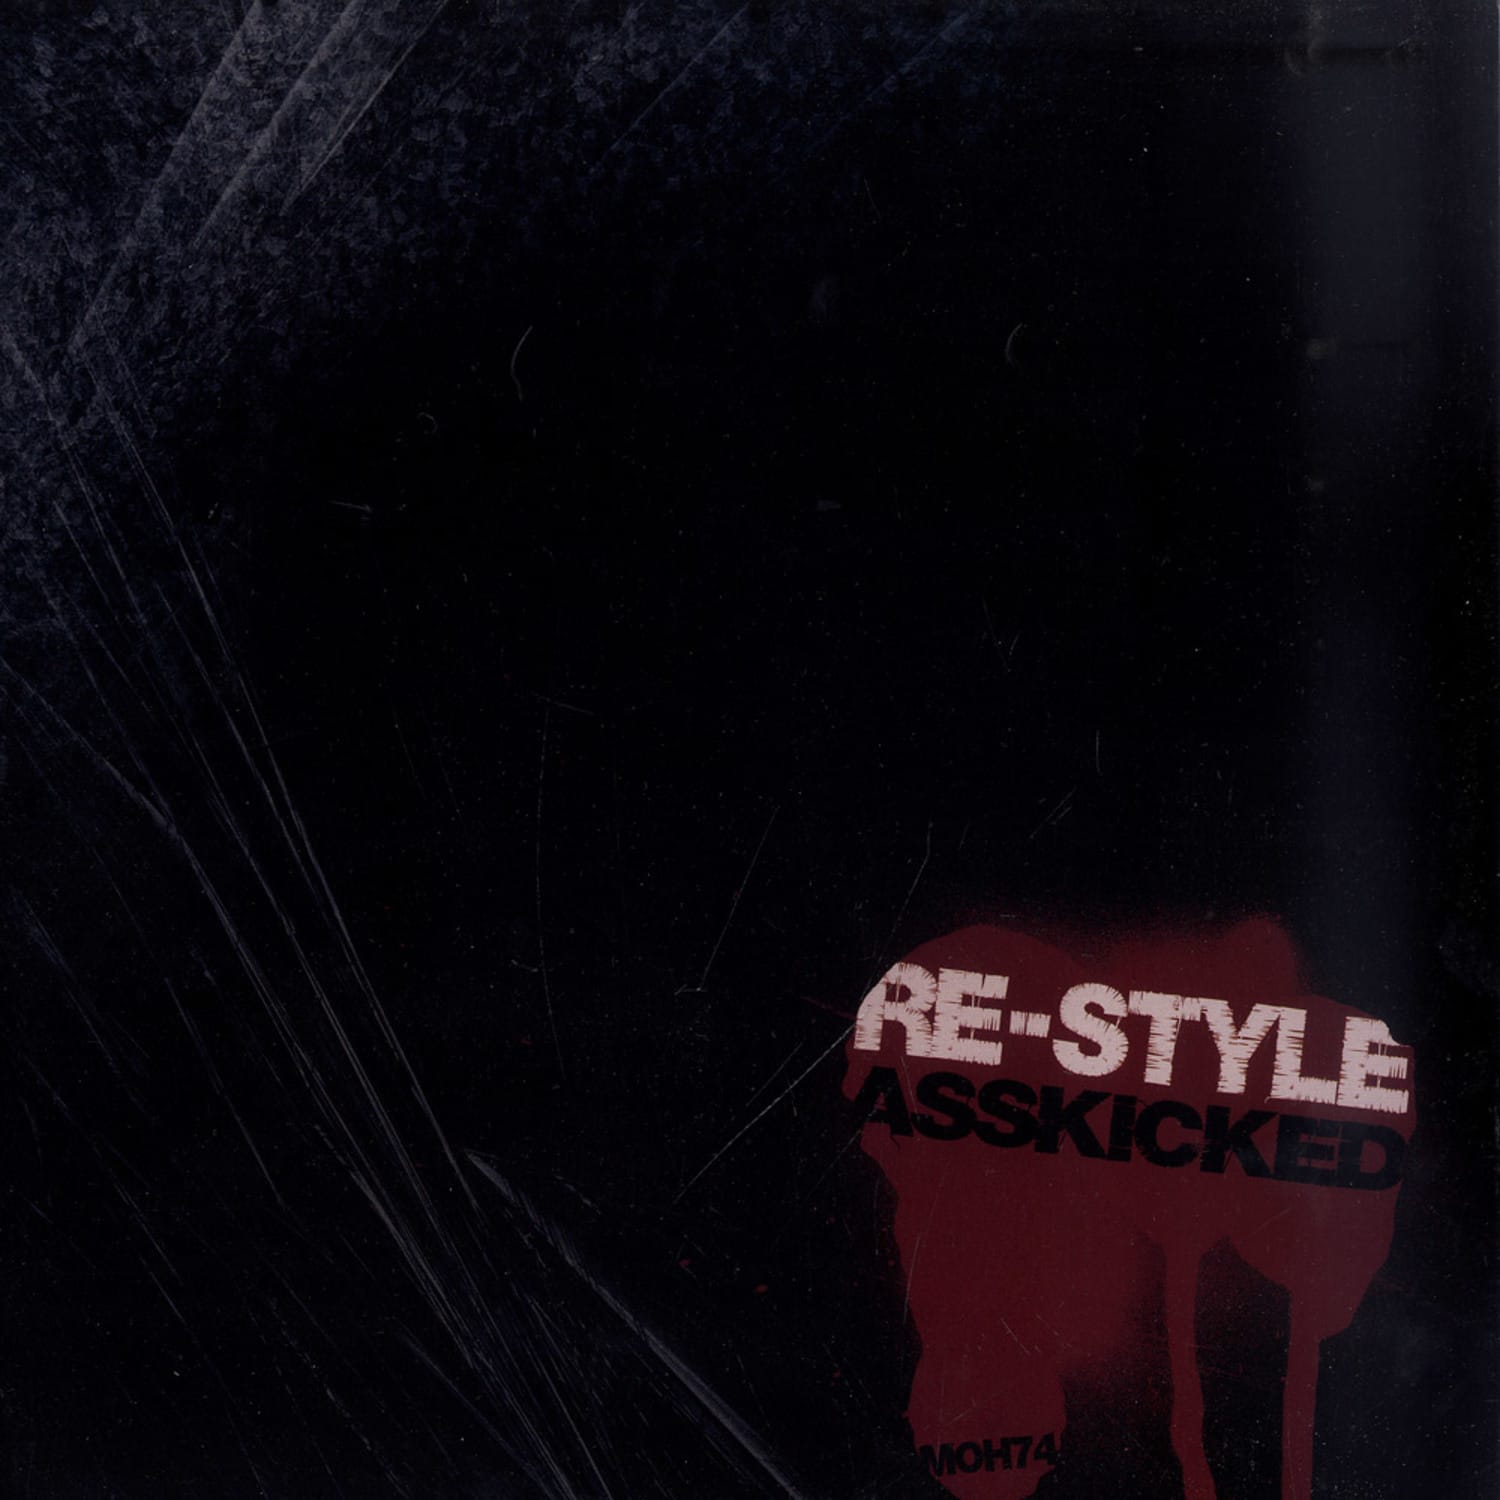 Re-Style - ASSKICKED